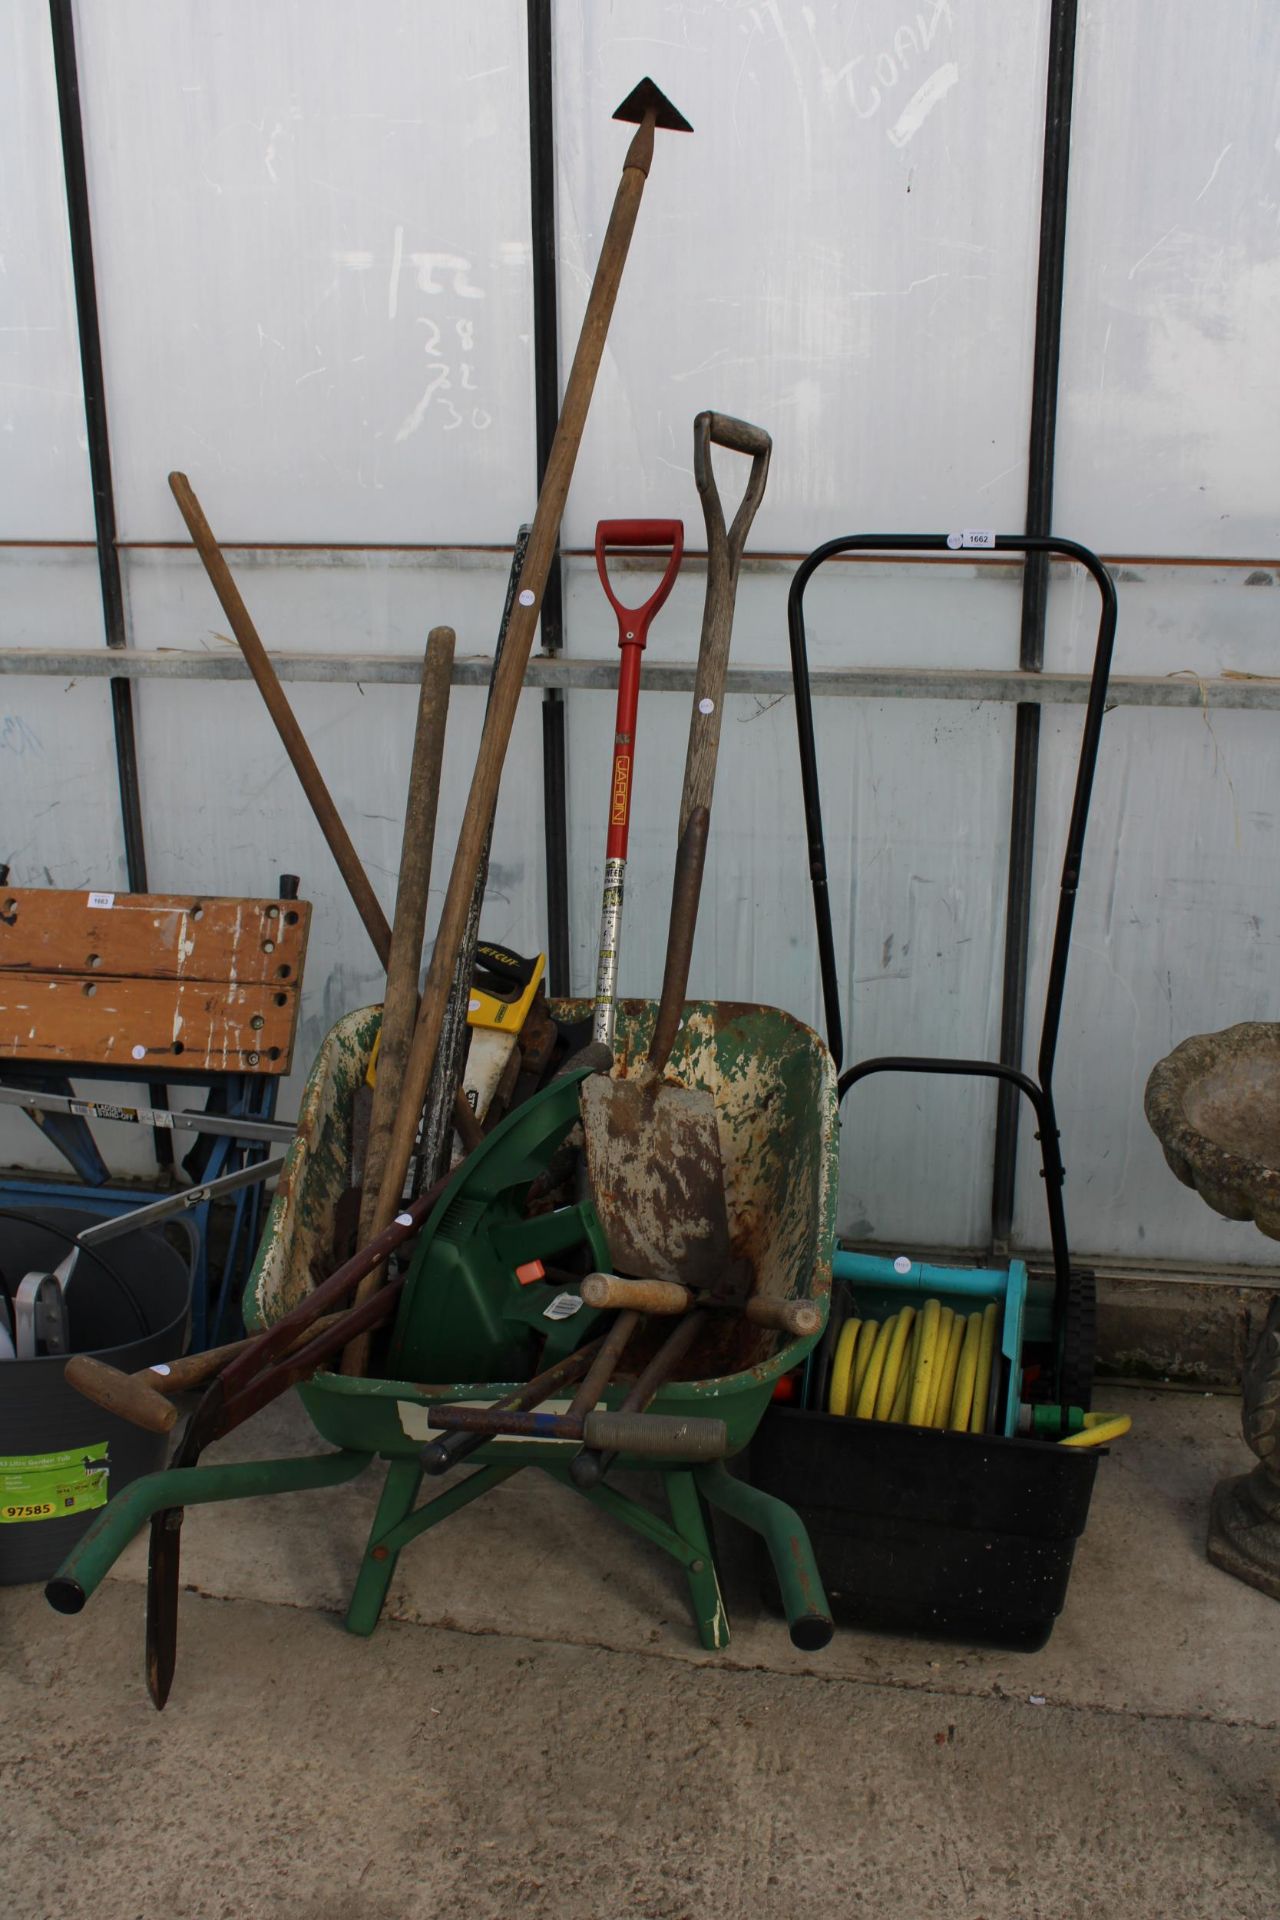 AN ASSORTMENT OF GARDEN TOOLS TO INCLUDE A HOSE PIPE, A PUSH MOWER AND A WHEEL BARROW ETC